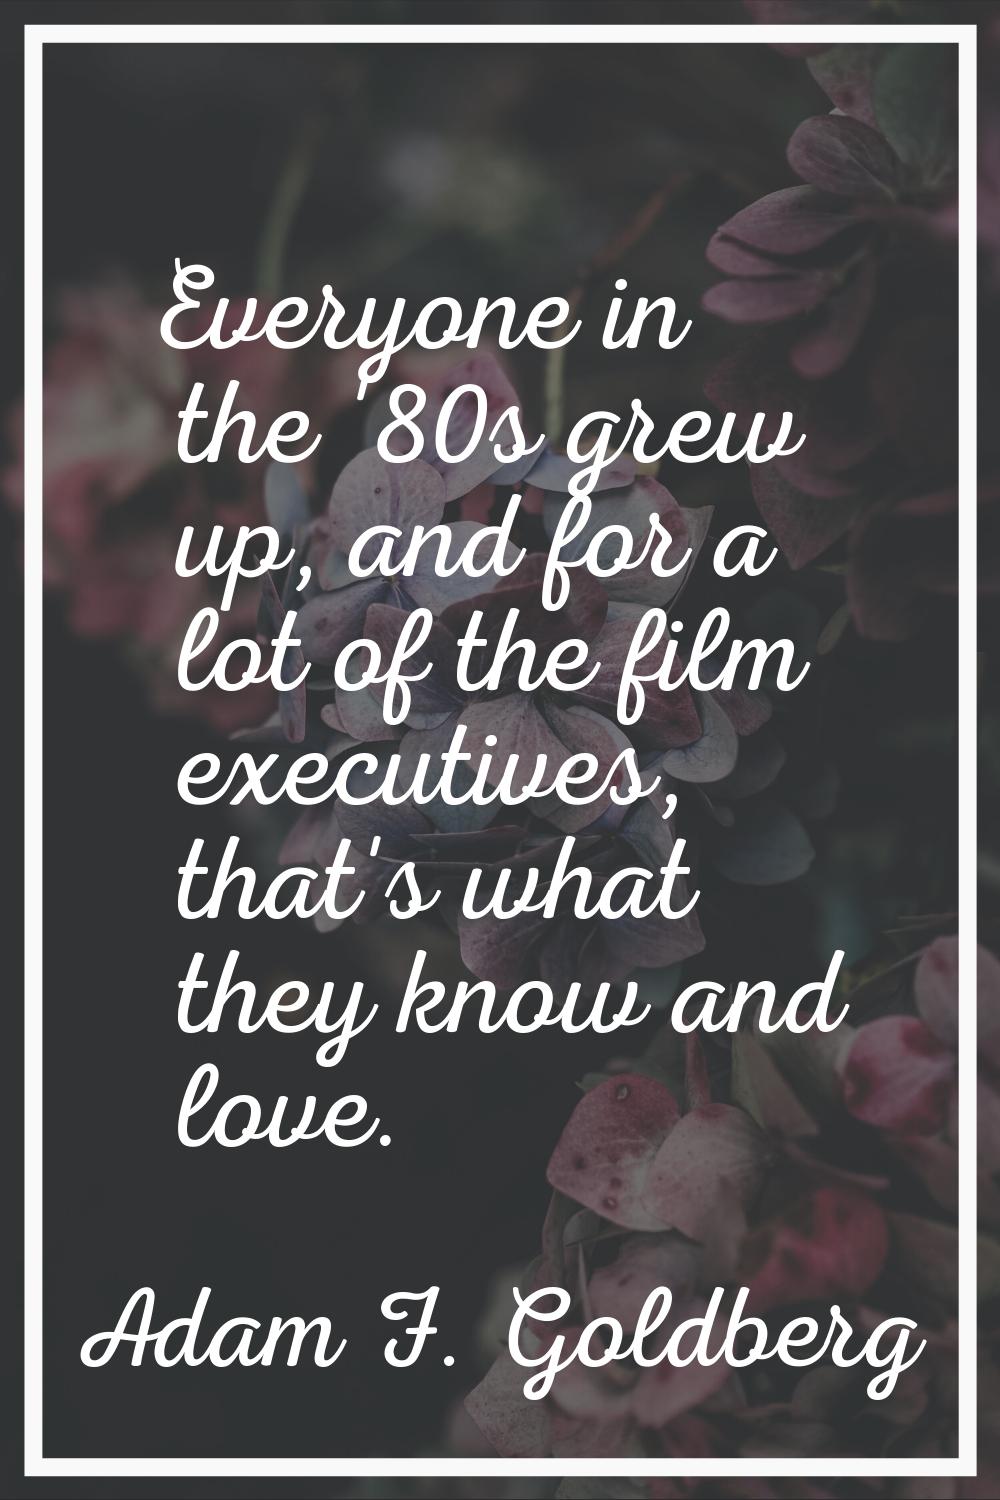 Everyone in the '80s grew up, and for a lot of the film executives, that's what they know and love.